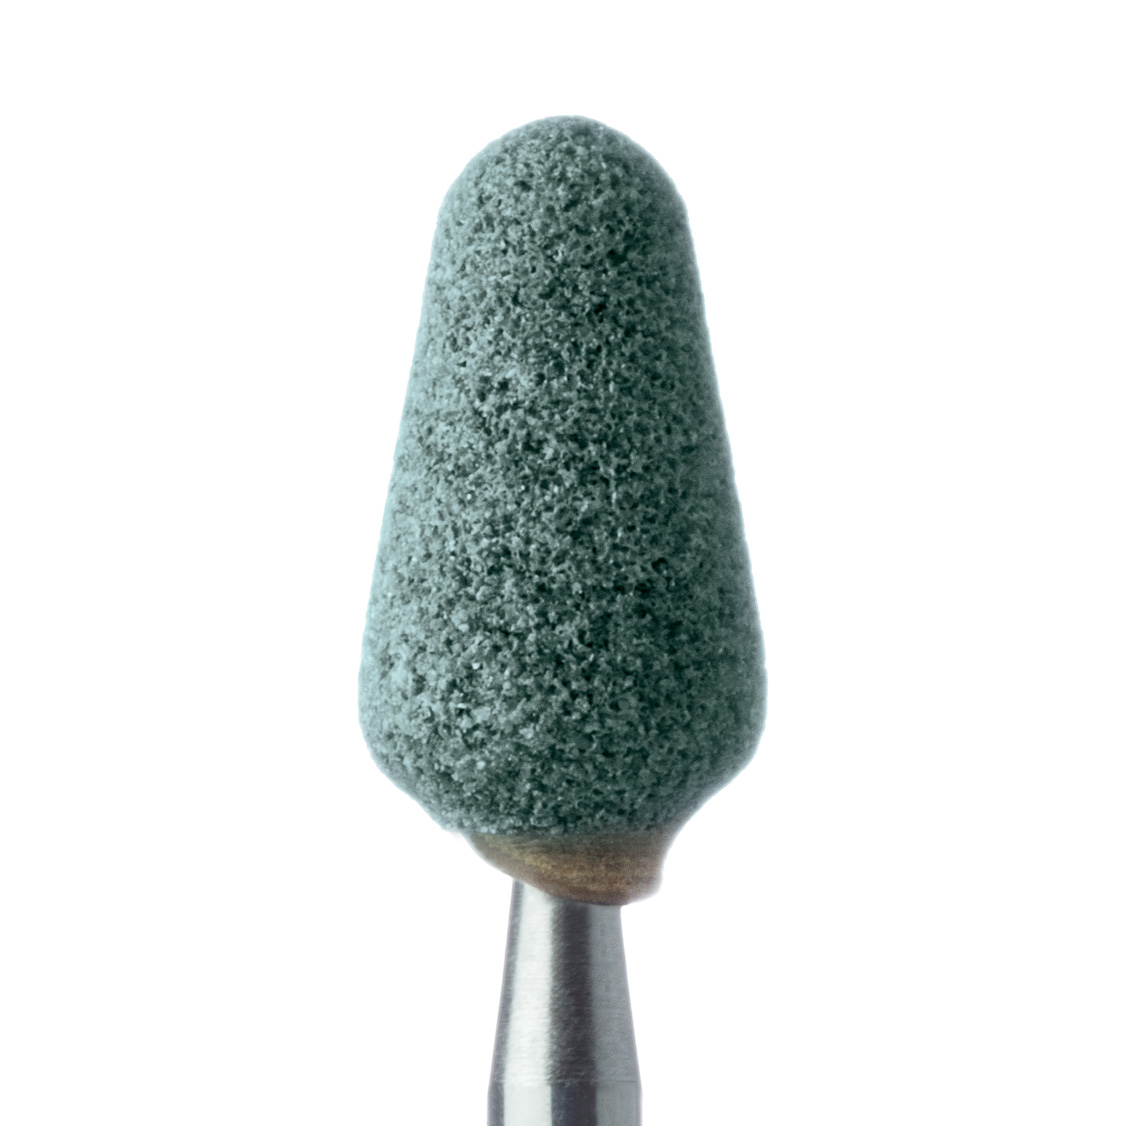 671-060-RA-GRN Abrasive, Green, Wide Nose Cone, 6.0mm RA